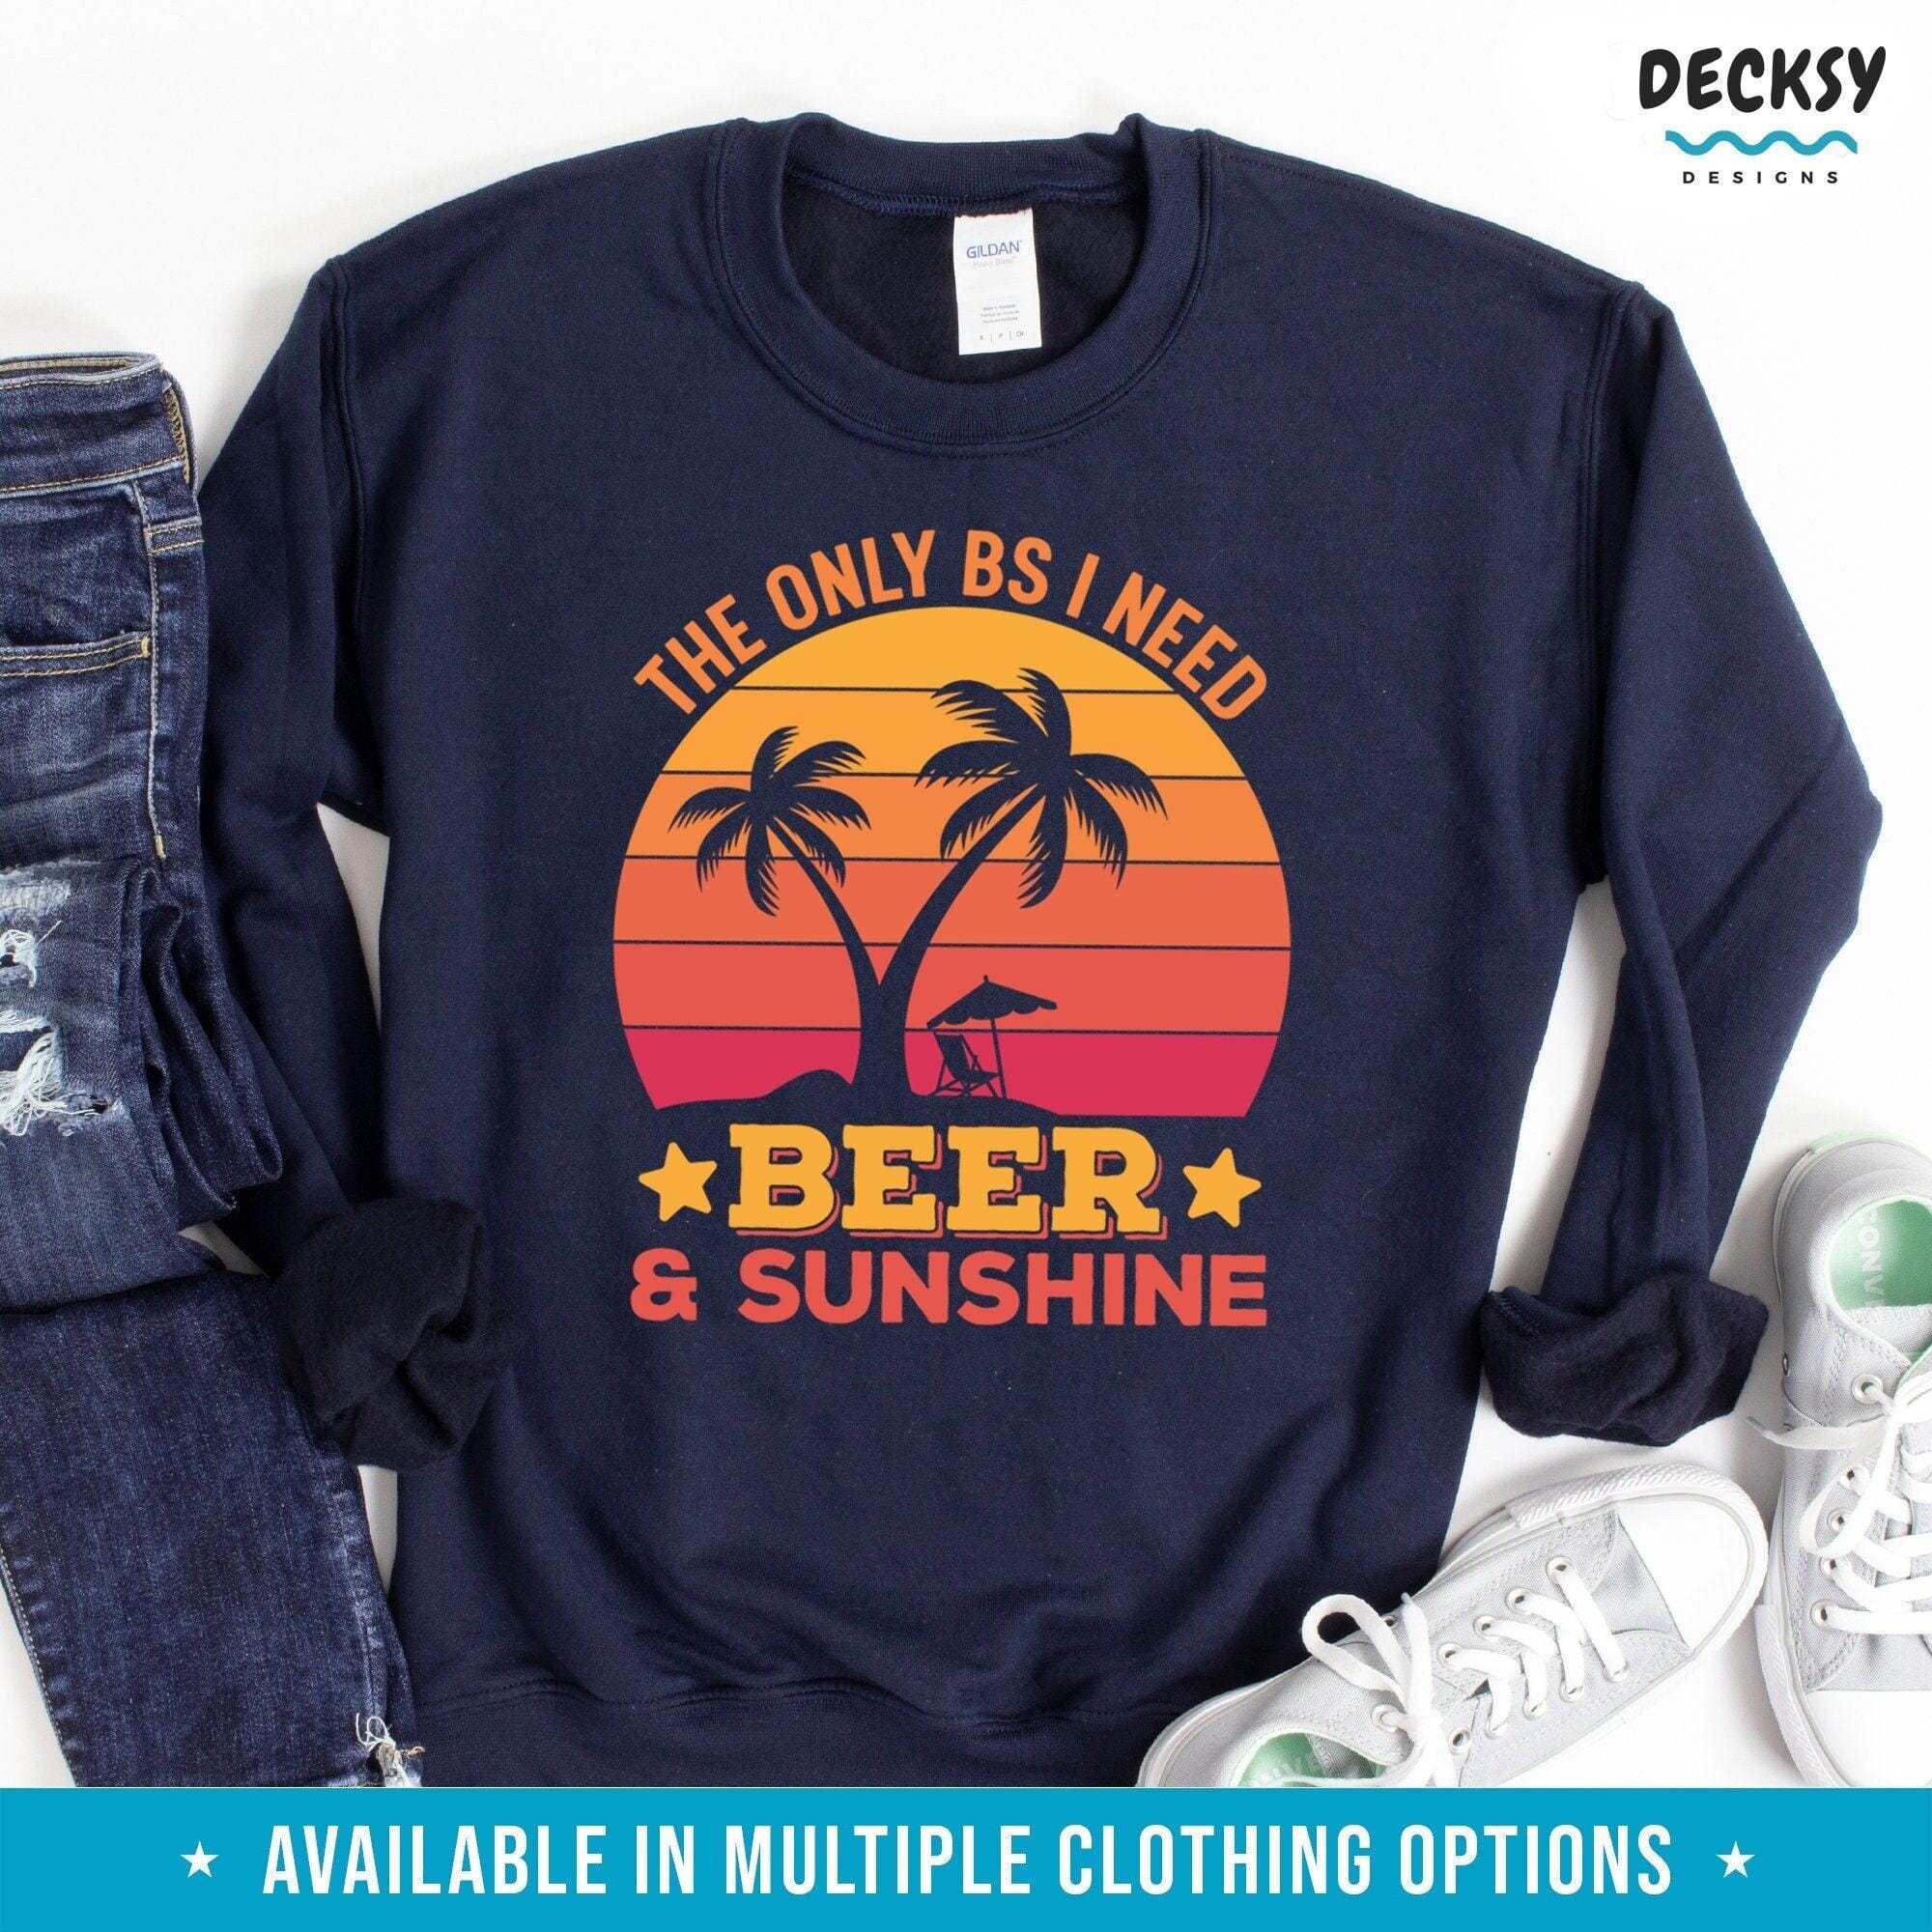 Beer & Sunshine Shirt, Funny Beer Lover Gift-Clothing:Gender-Neutral Adult Clothing:Tops & Tees:T-shirts:Graphic Tees-DecksyDesigns